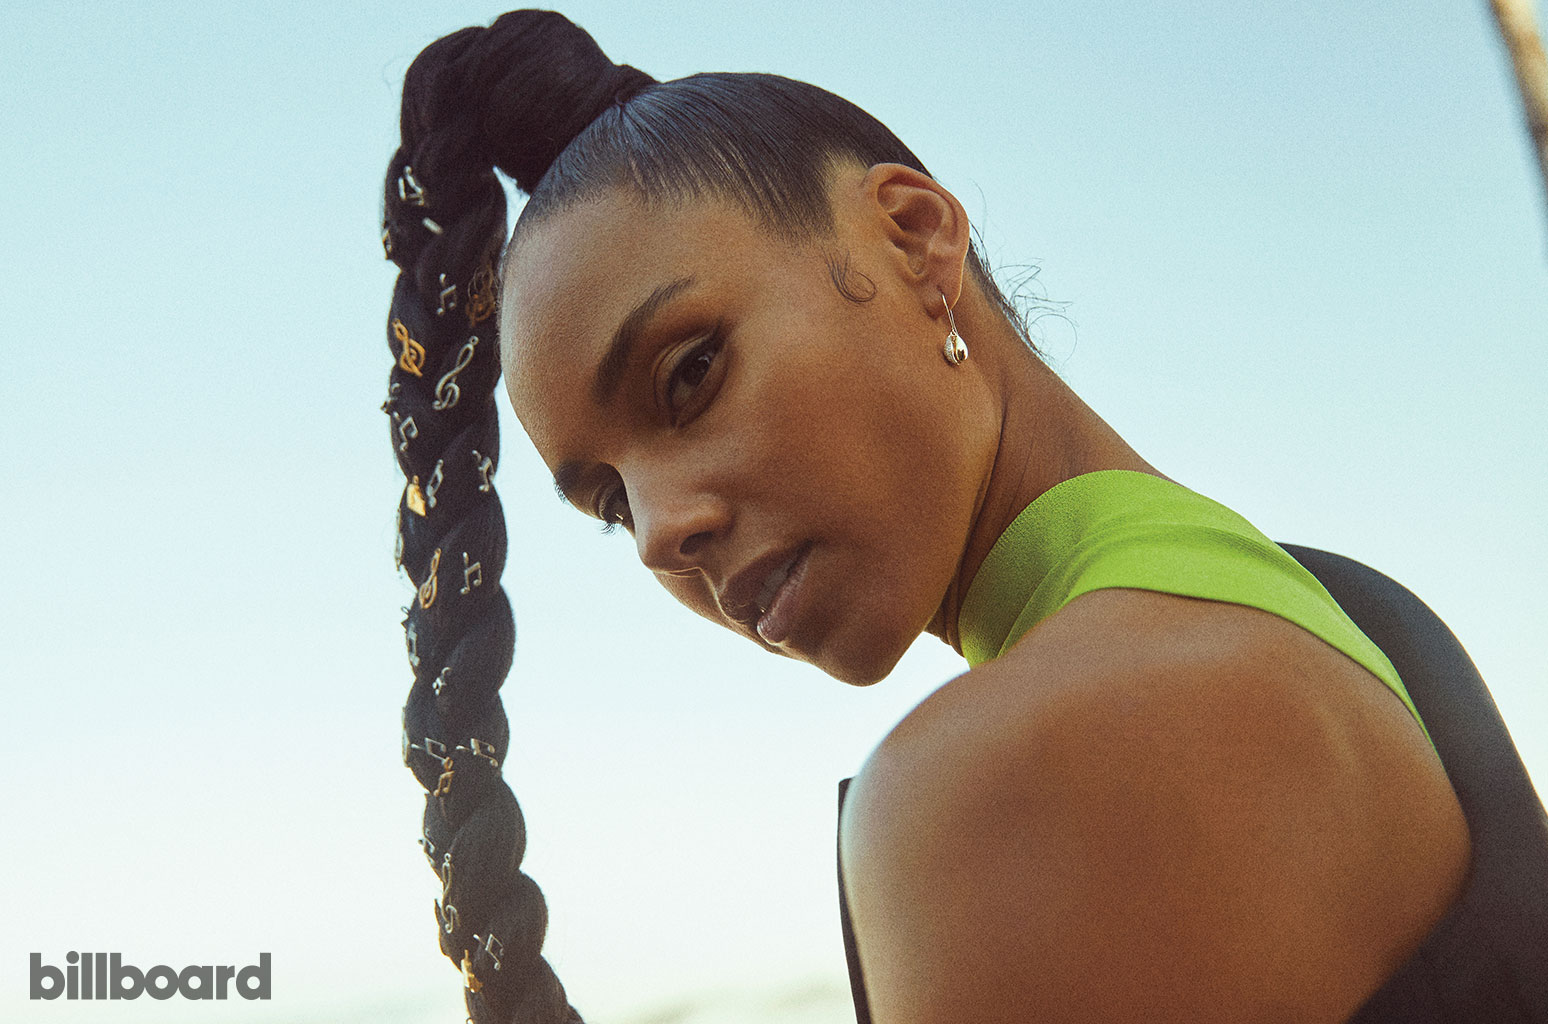 Alicia Keys' New Album Is Coming: Here's the Cover Art an...